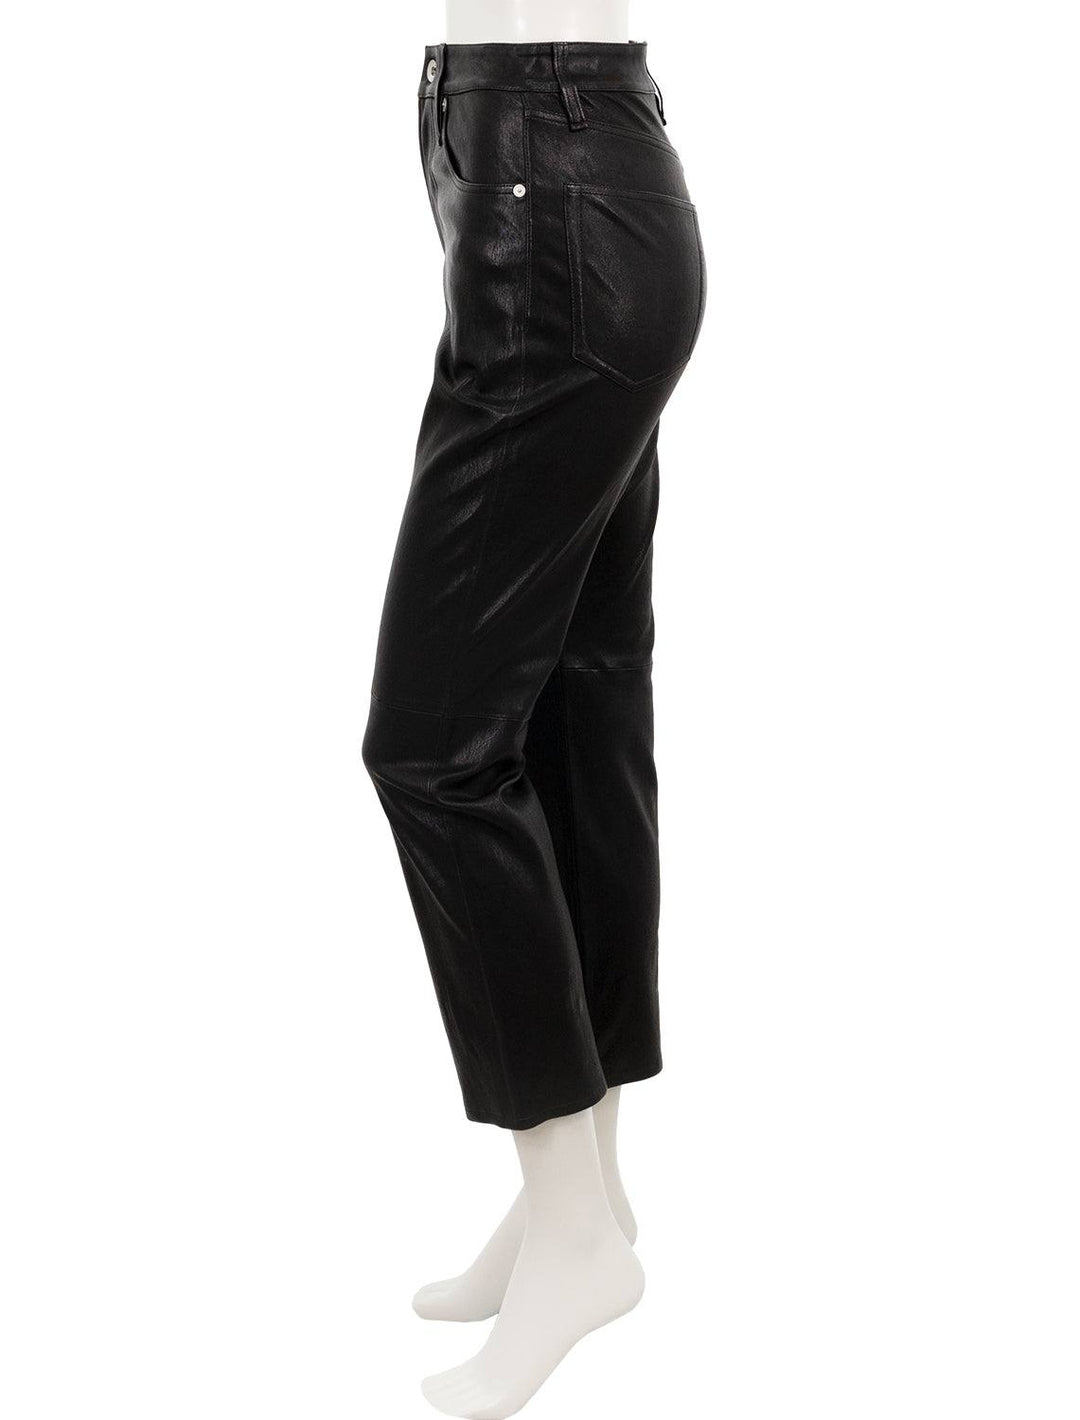 side view of vintage leather cigarette pant in black